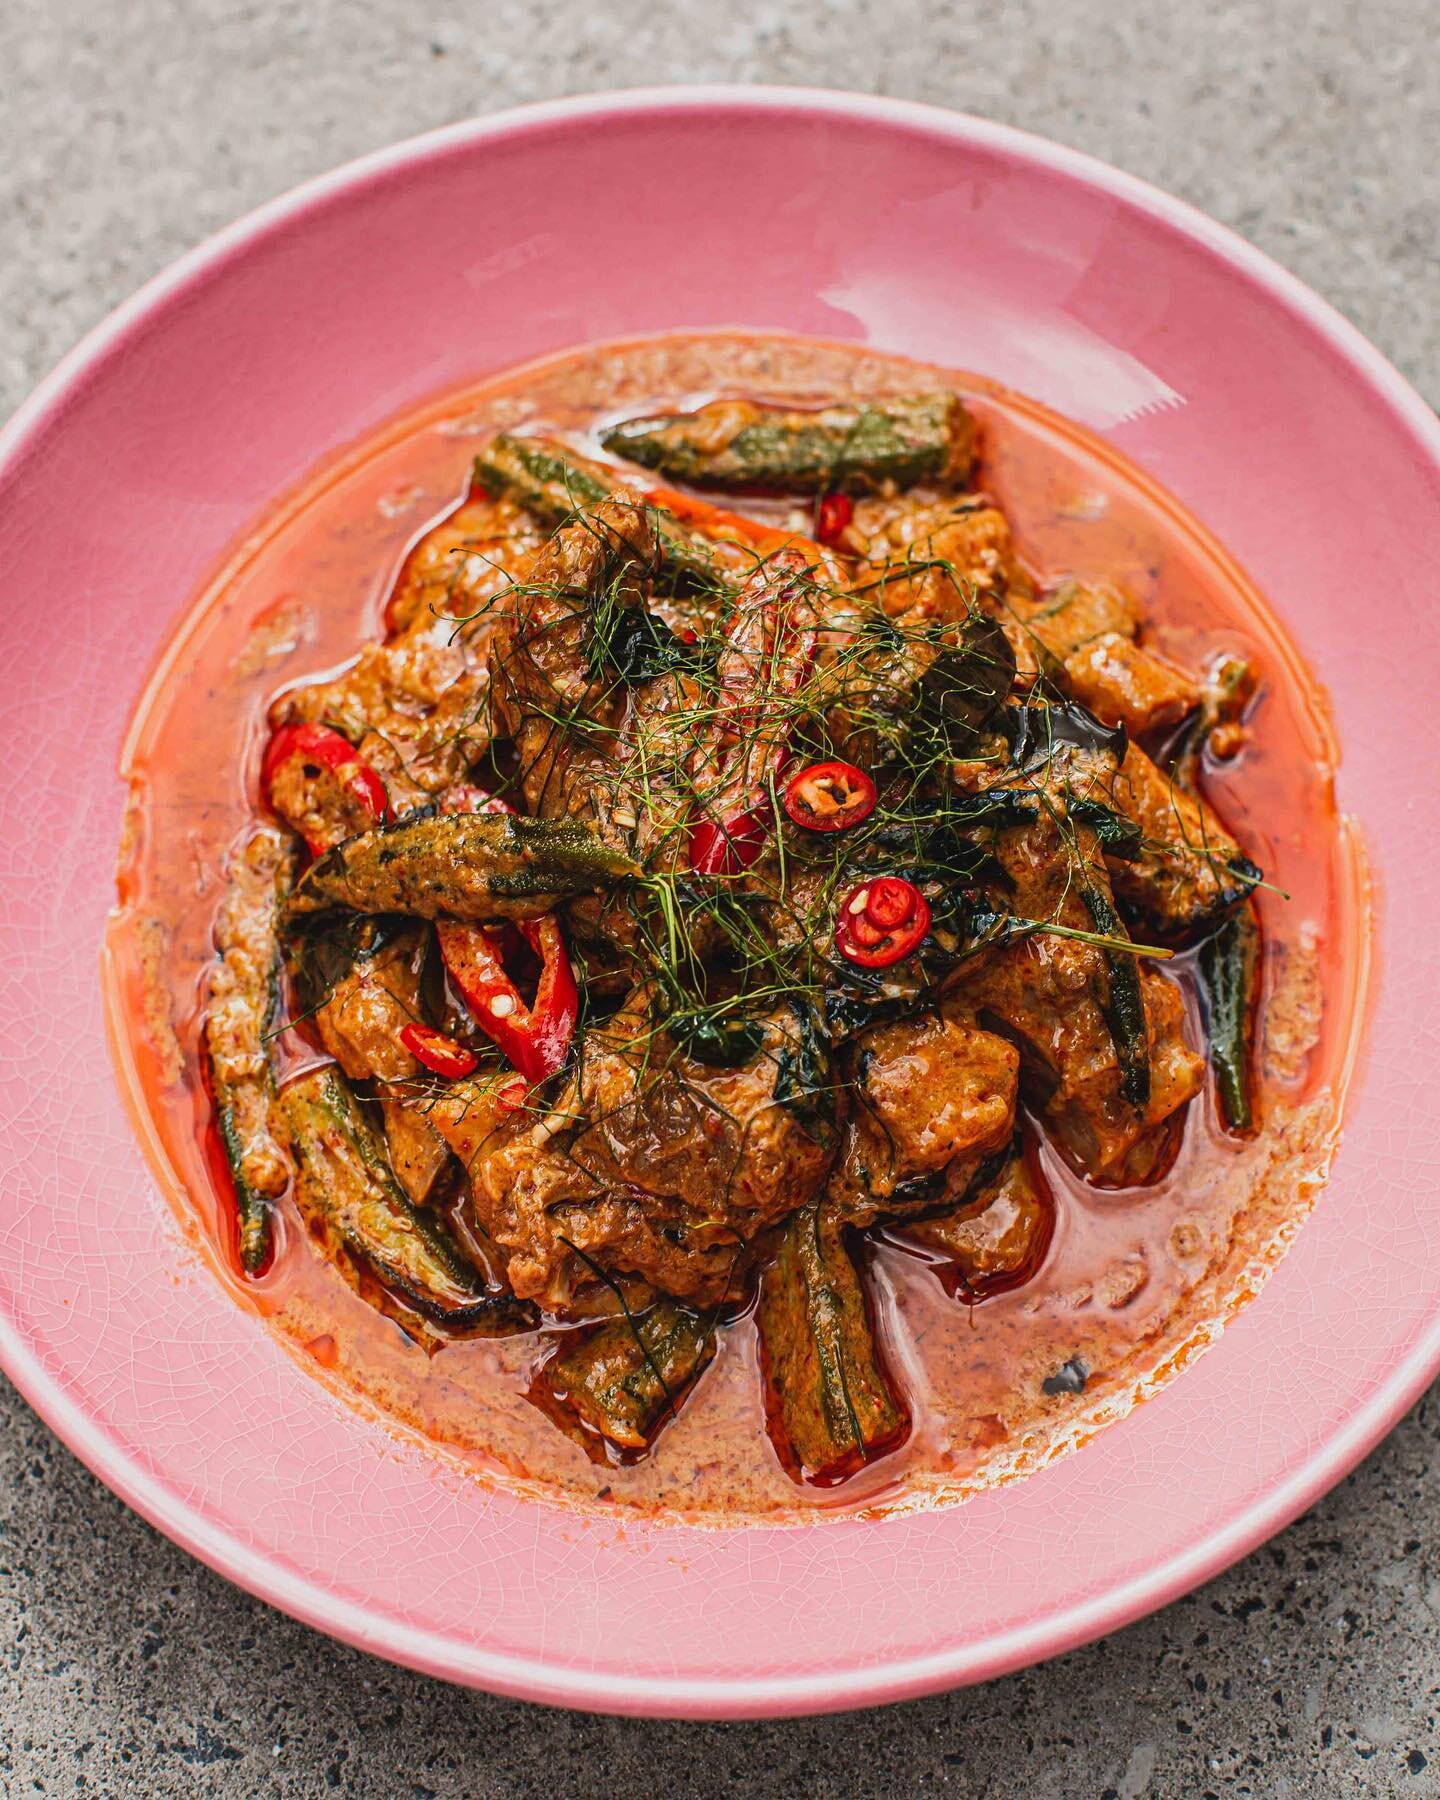 Our new authentic red curry &bull; 
Red grandma curry, slow cooked pork ribs, coconut, okra, burnt pineapple, kaffir lime, chilli, thai basil.
😋🤤
#brisbane #thai